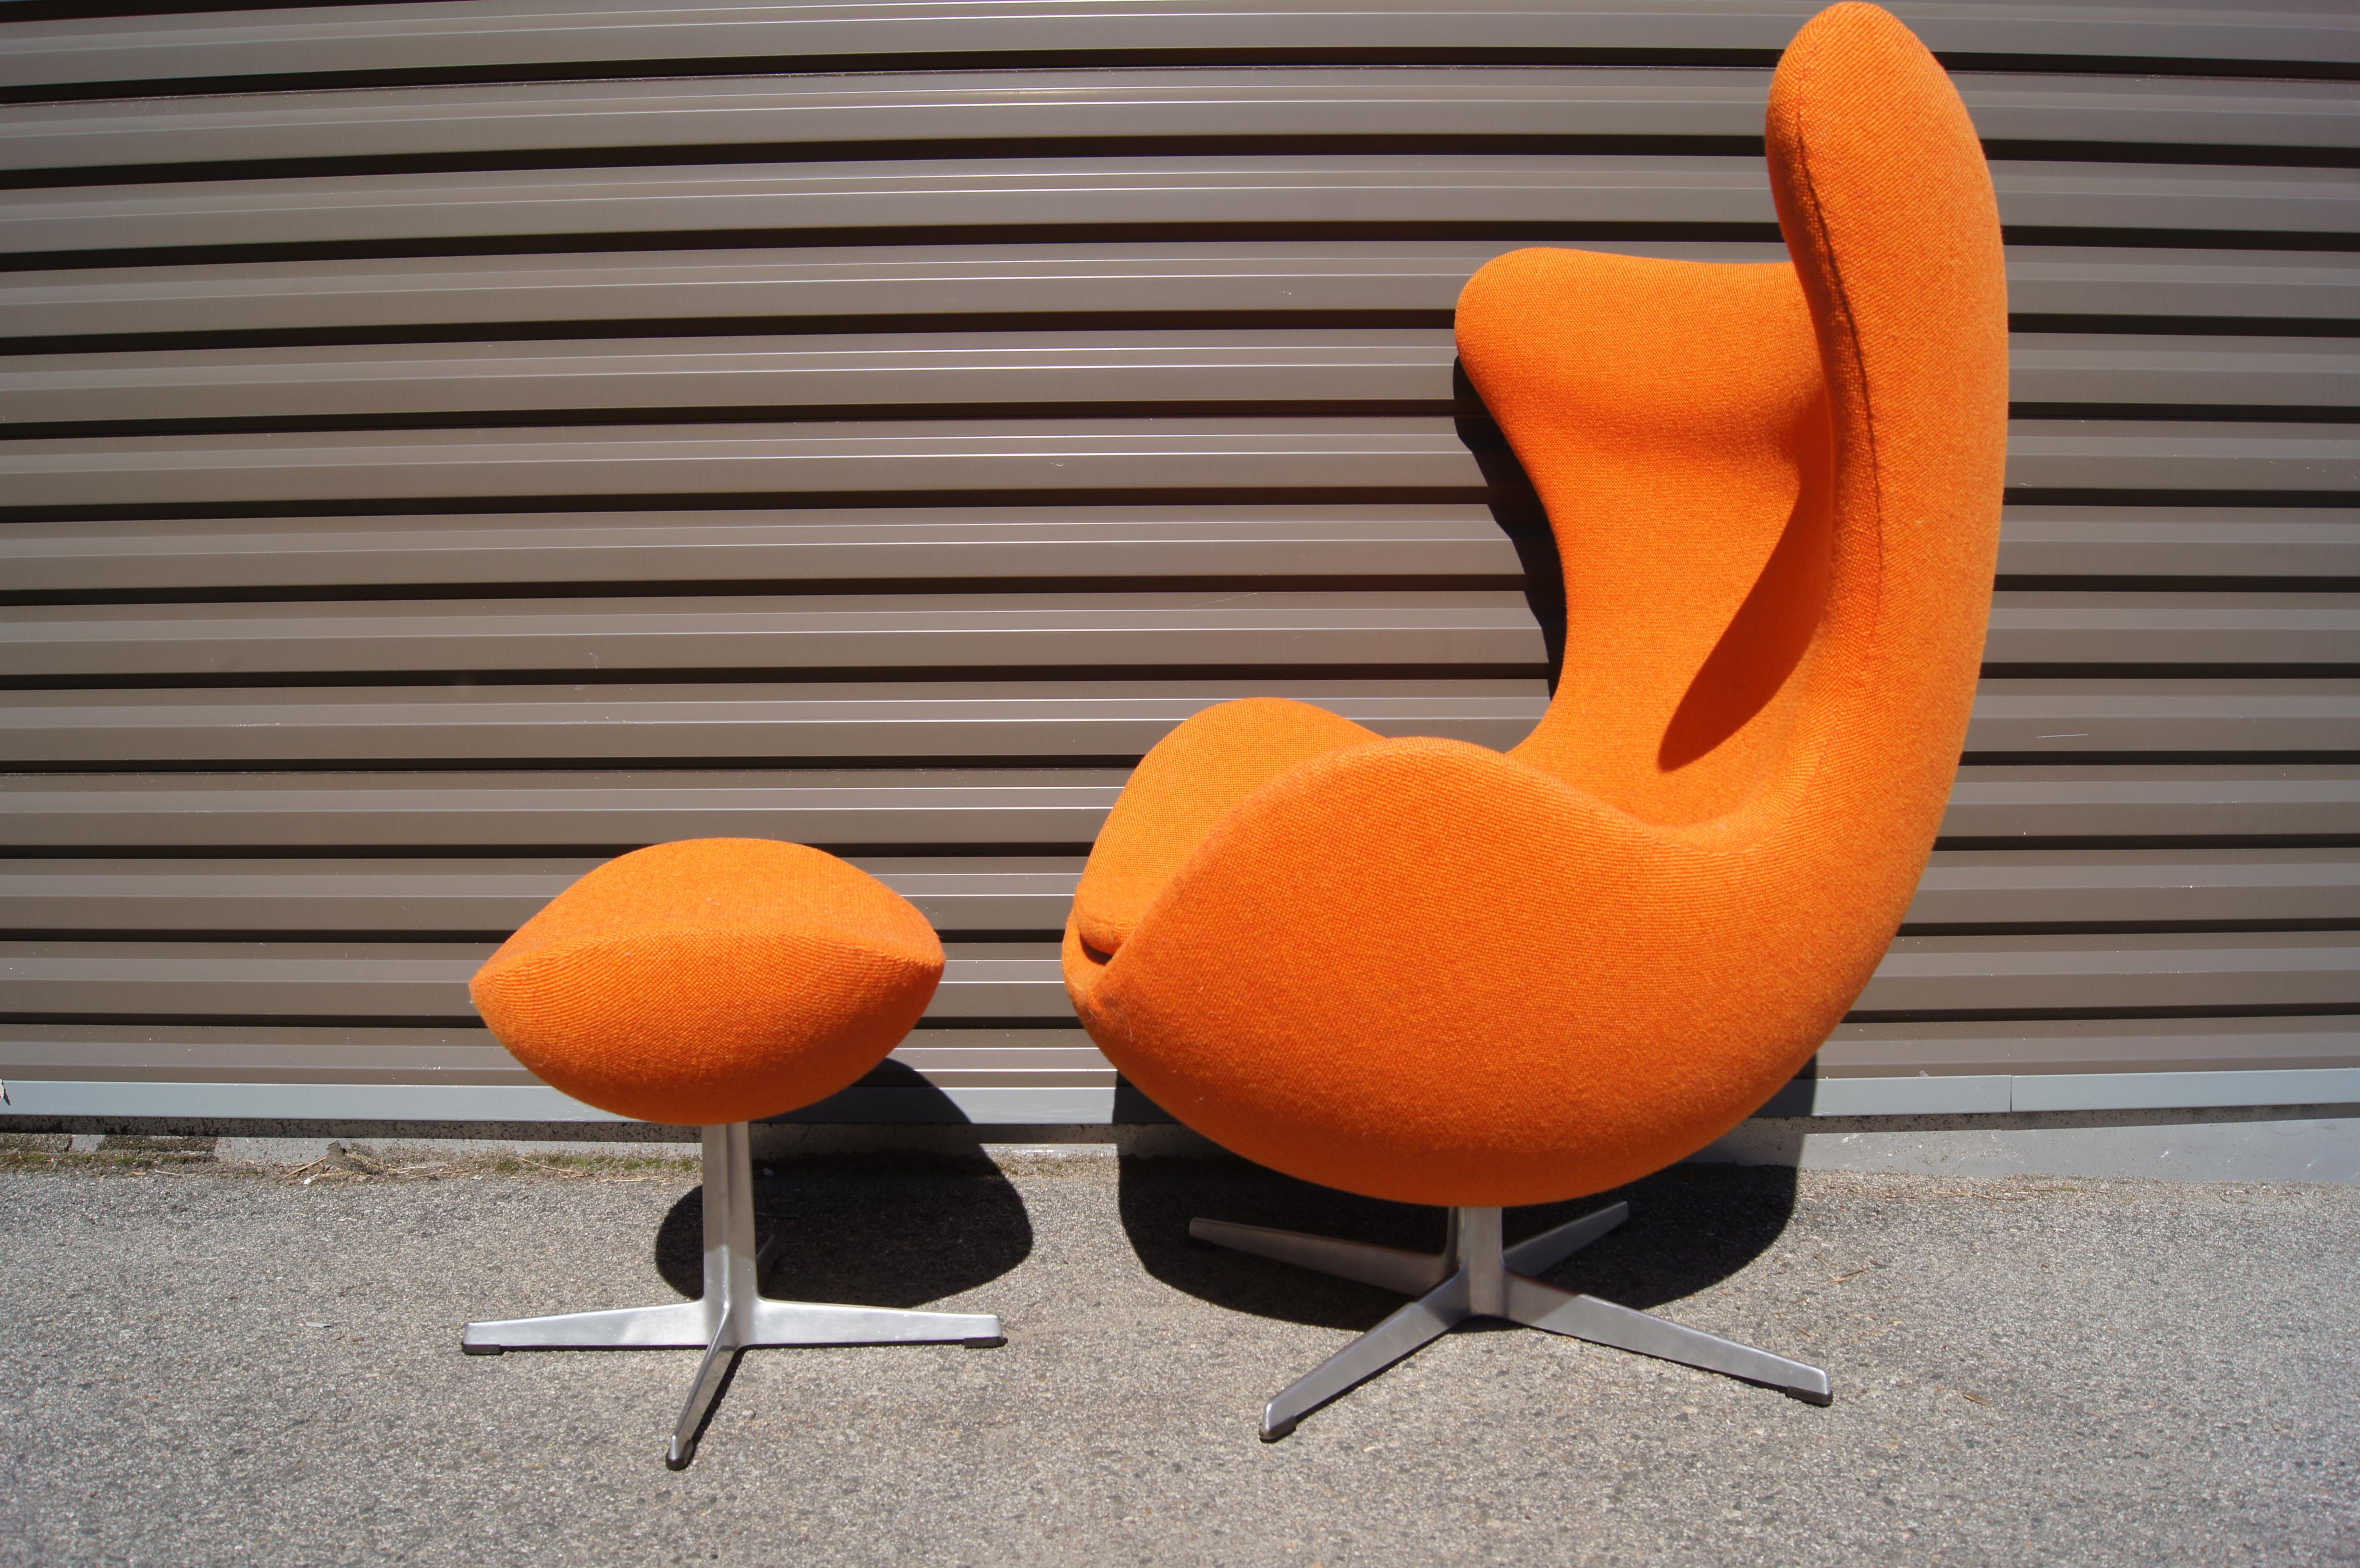 Unveiled at the Royal Copenhagen Hotel in Denmark in 1958, the poster child of Danish design has become one of the most coveted chairs of all time. Fifty years after Danish designer and architect Arne Jacobsen first created the chair in his garage,